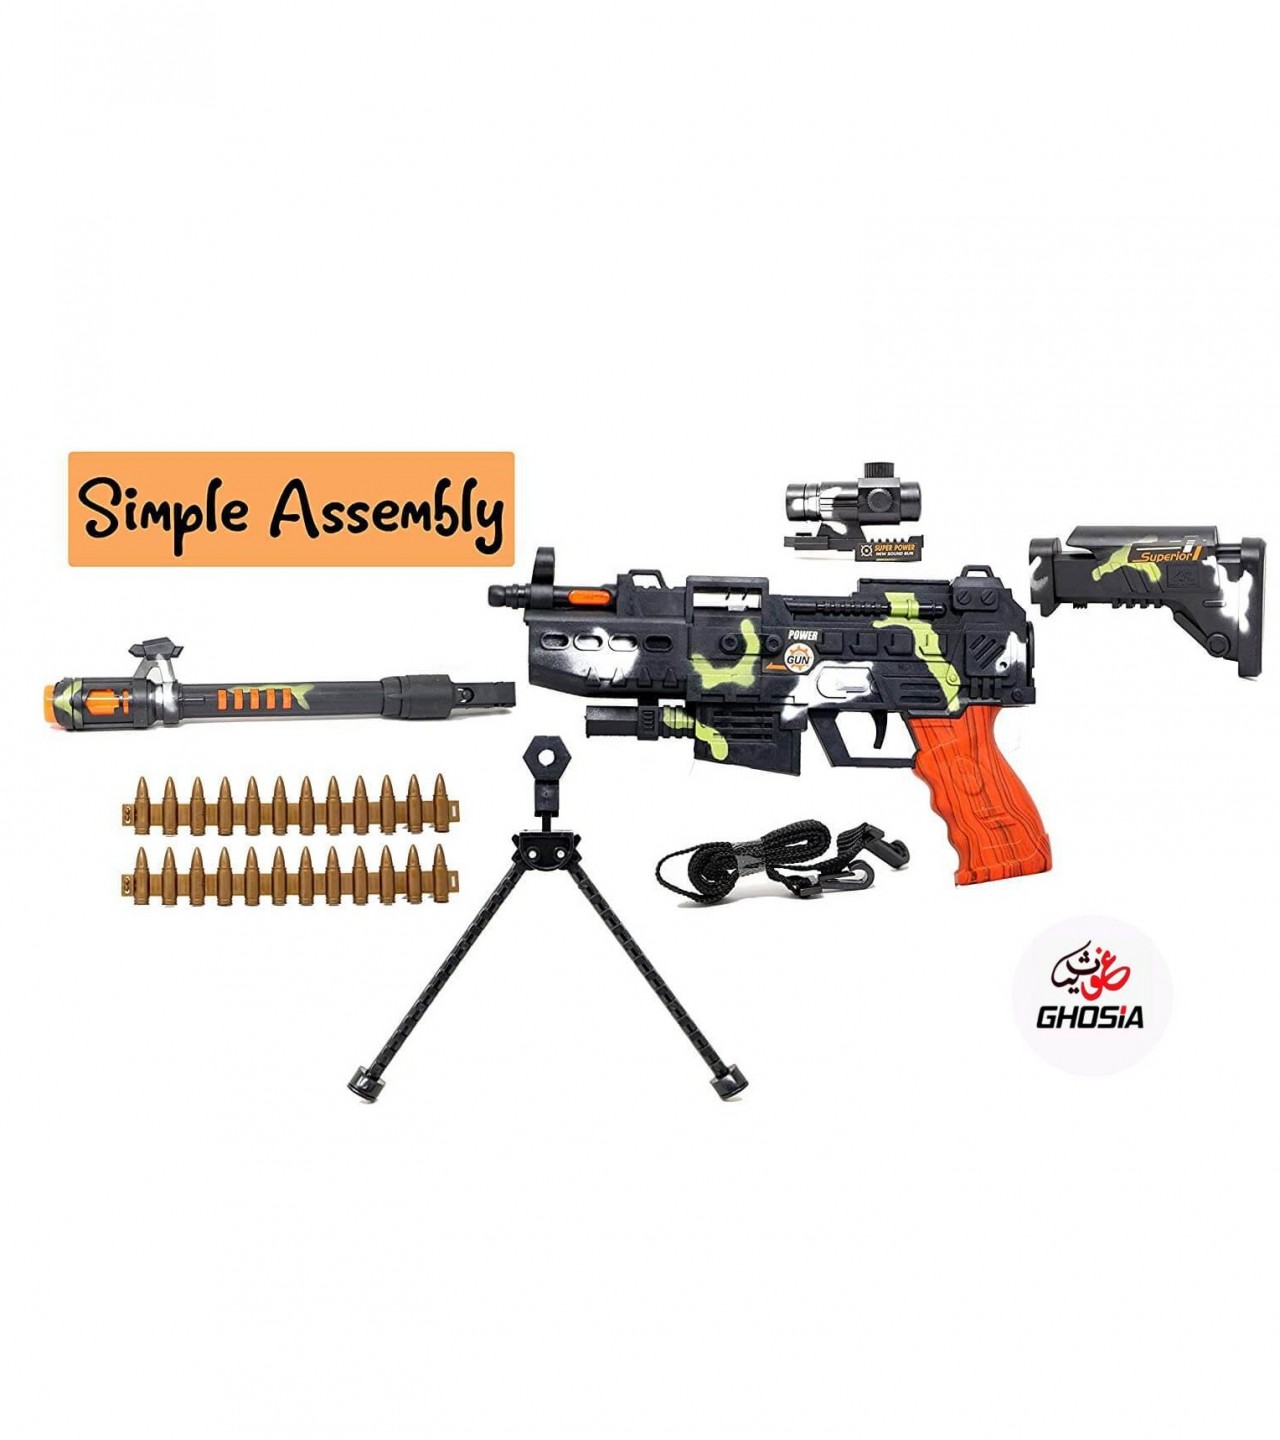 Acousto optic Iron Gun for kids with music lights and laser